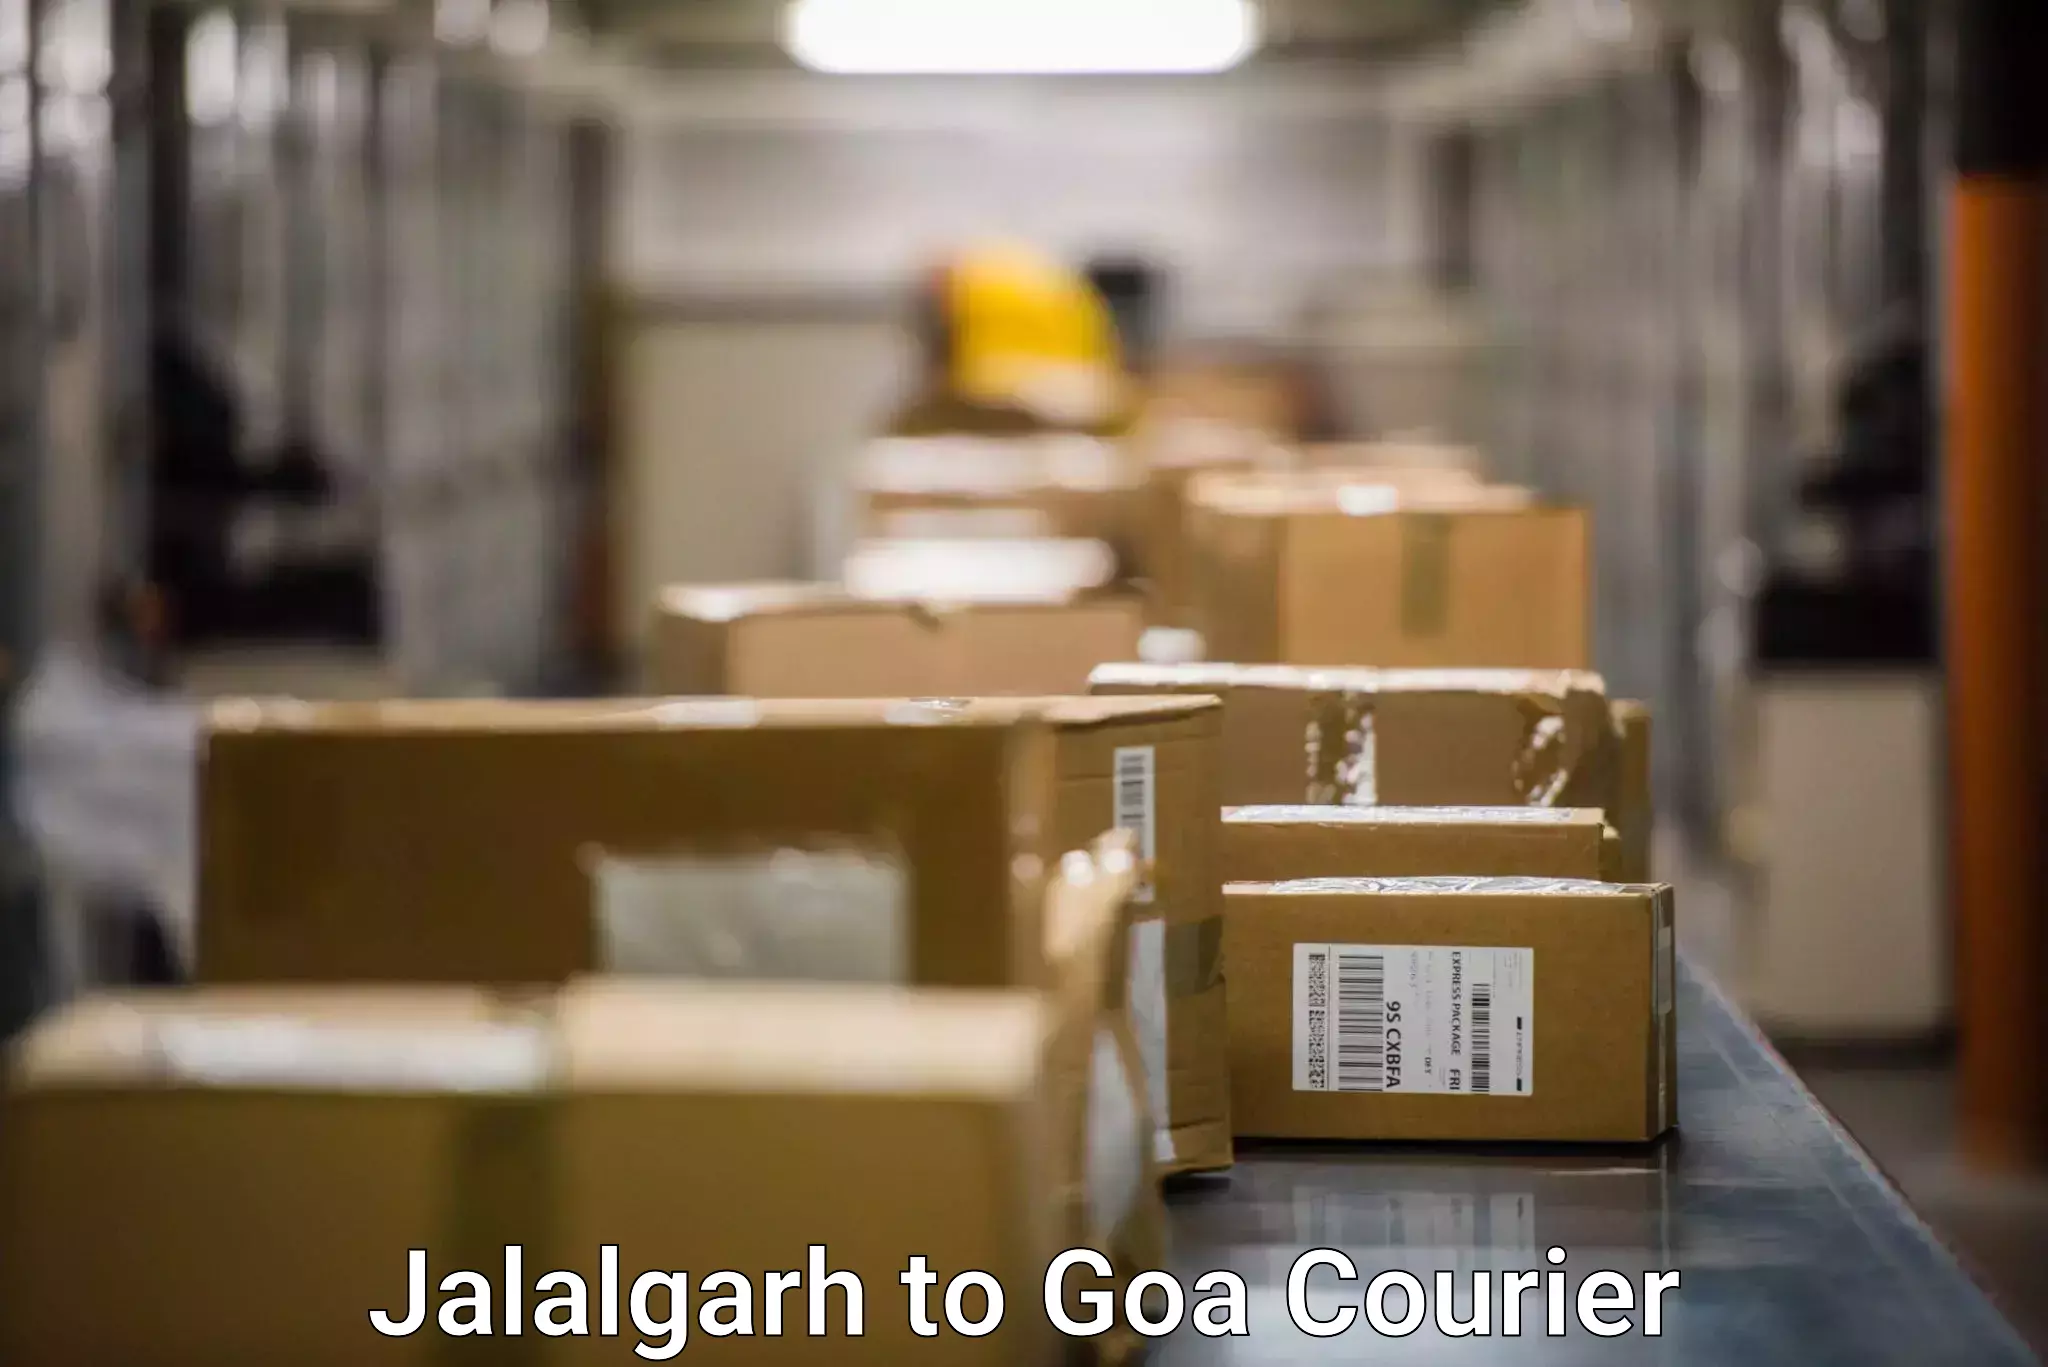 Courier service partnerships in Jalalgarh to Goa